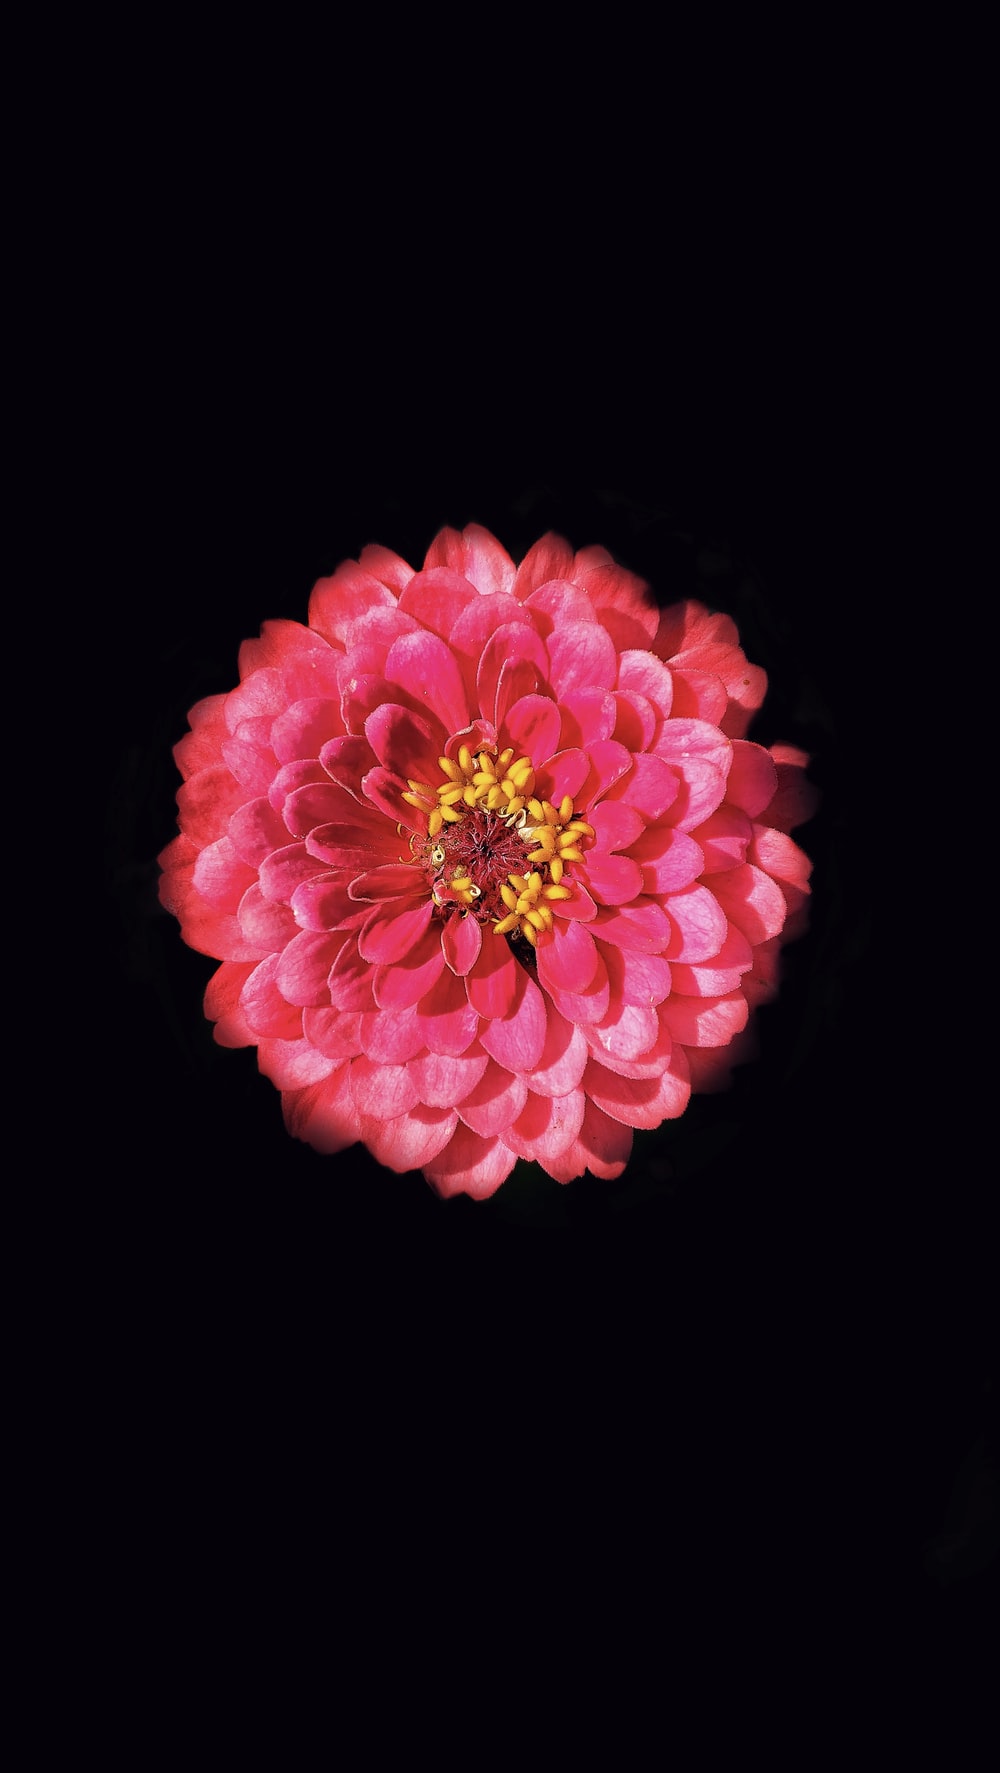 Pink Flower With Black Background Photo Image On